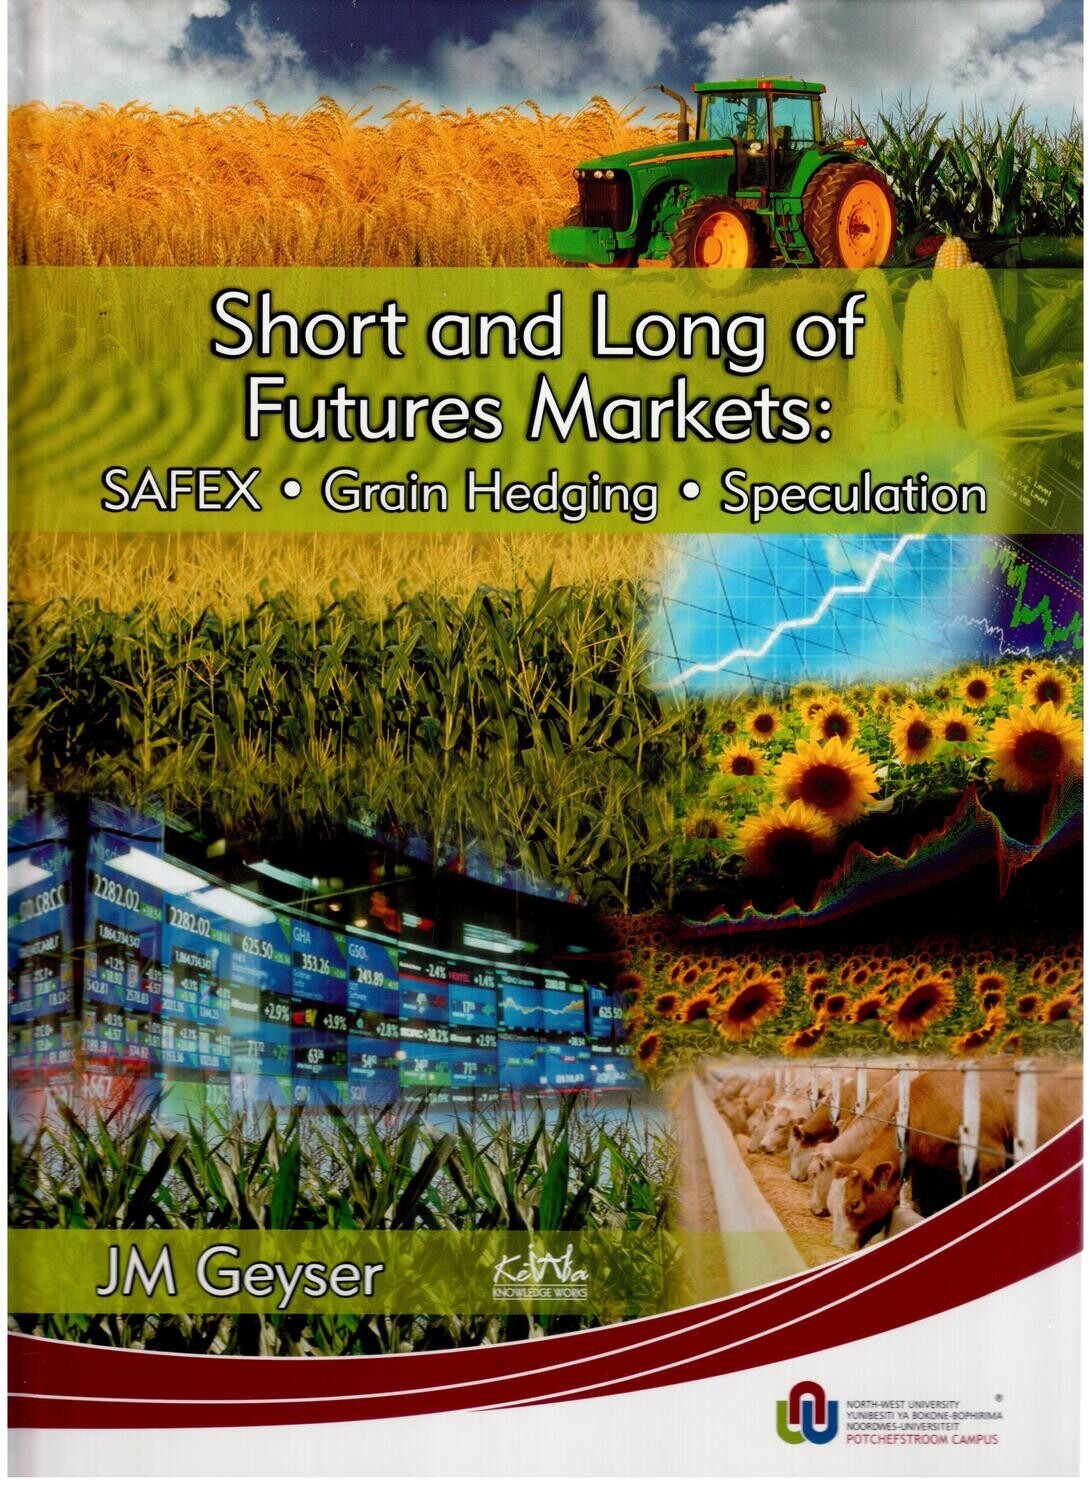 Short and Long of Futures Markets